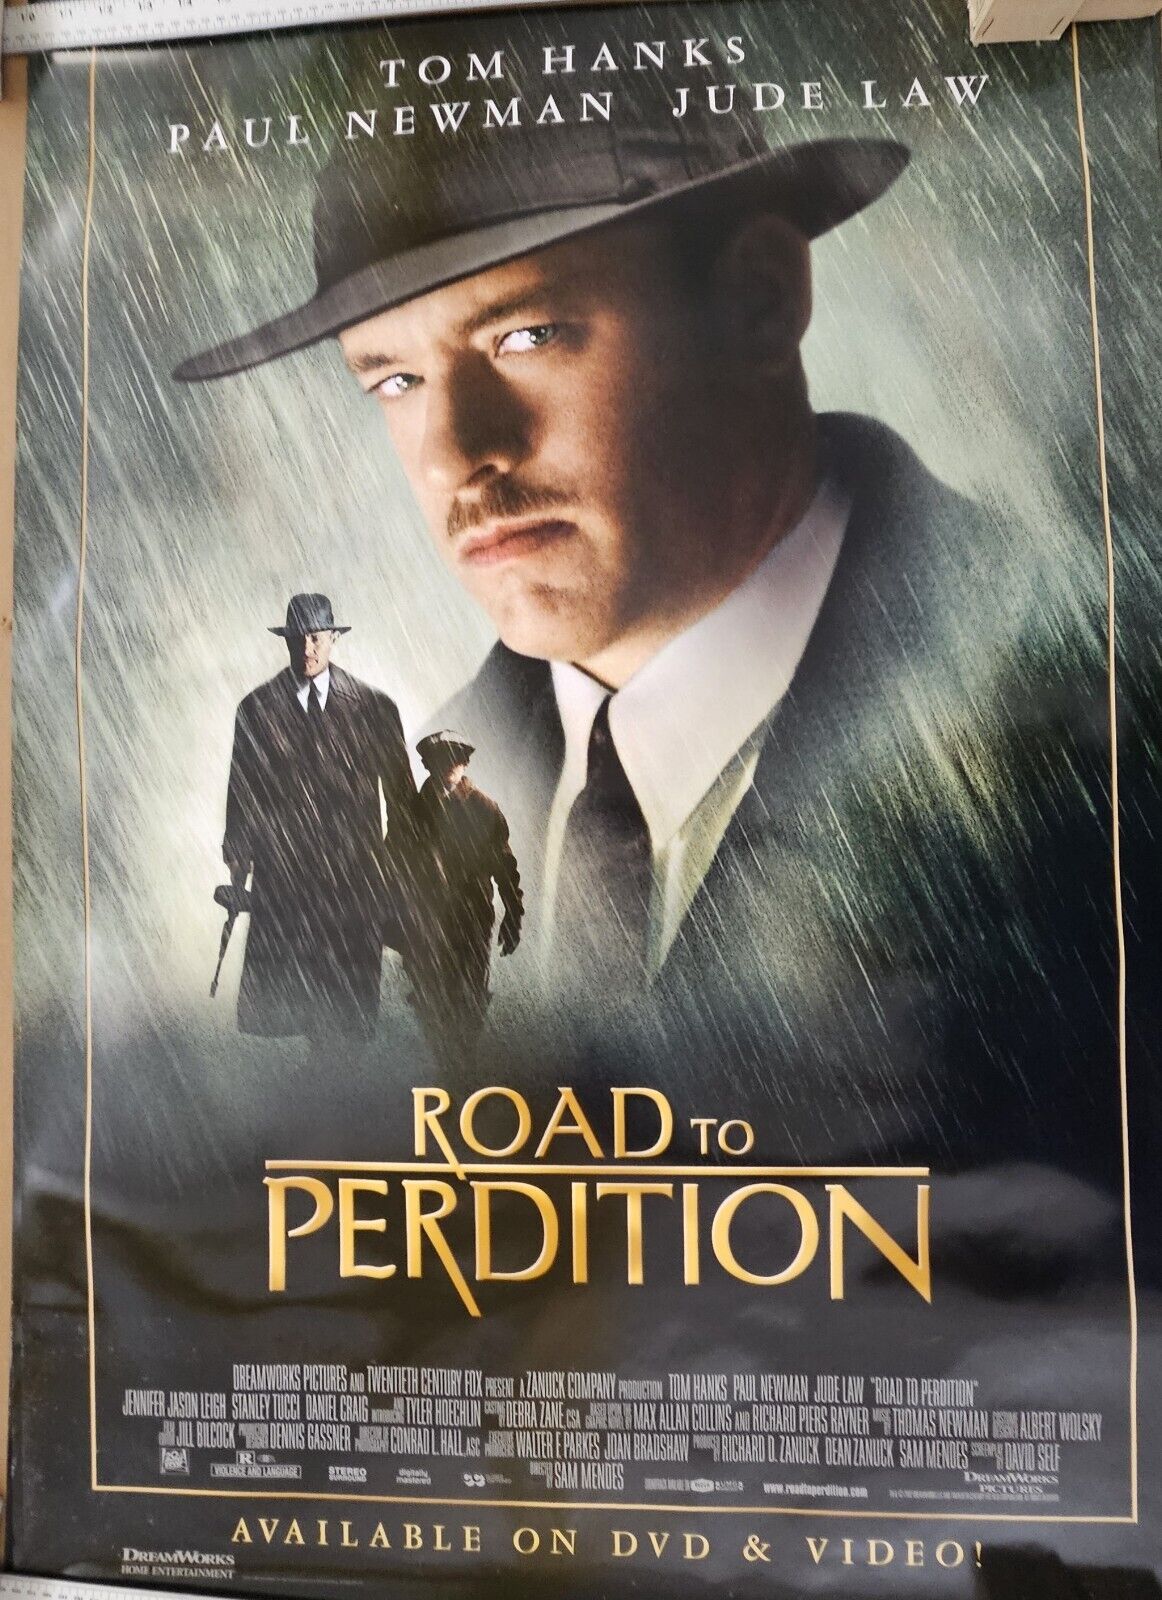 Tom Hanks  And Paul Neman  in Road To Perdition DVD promotional Movie poster